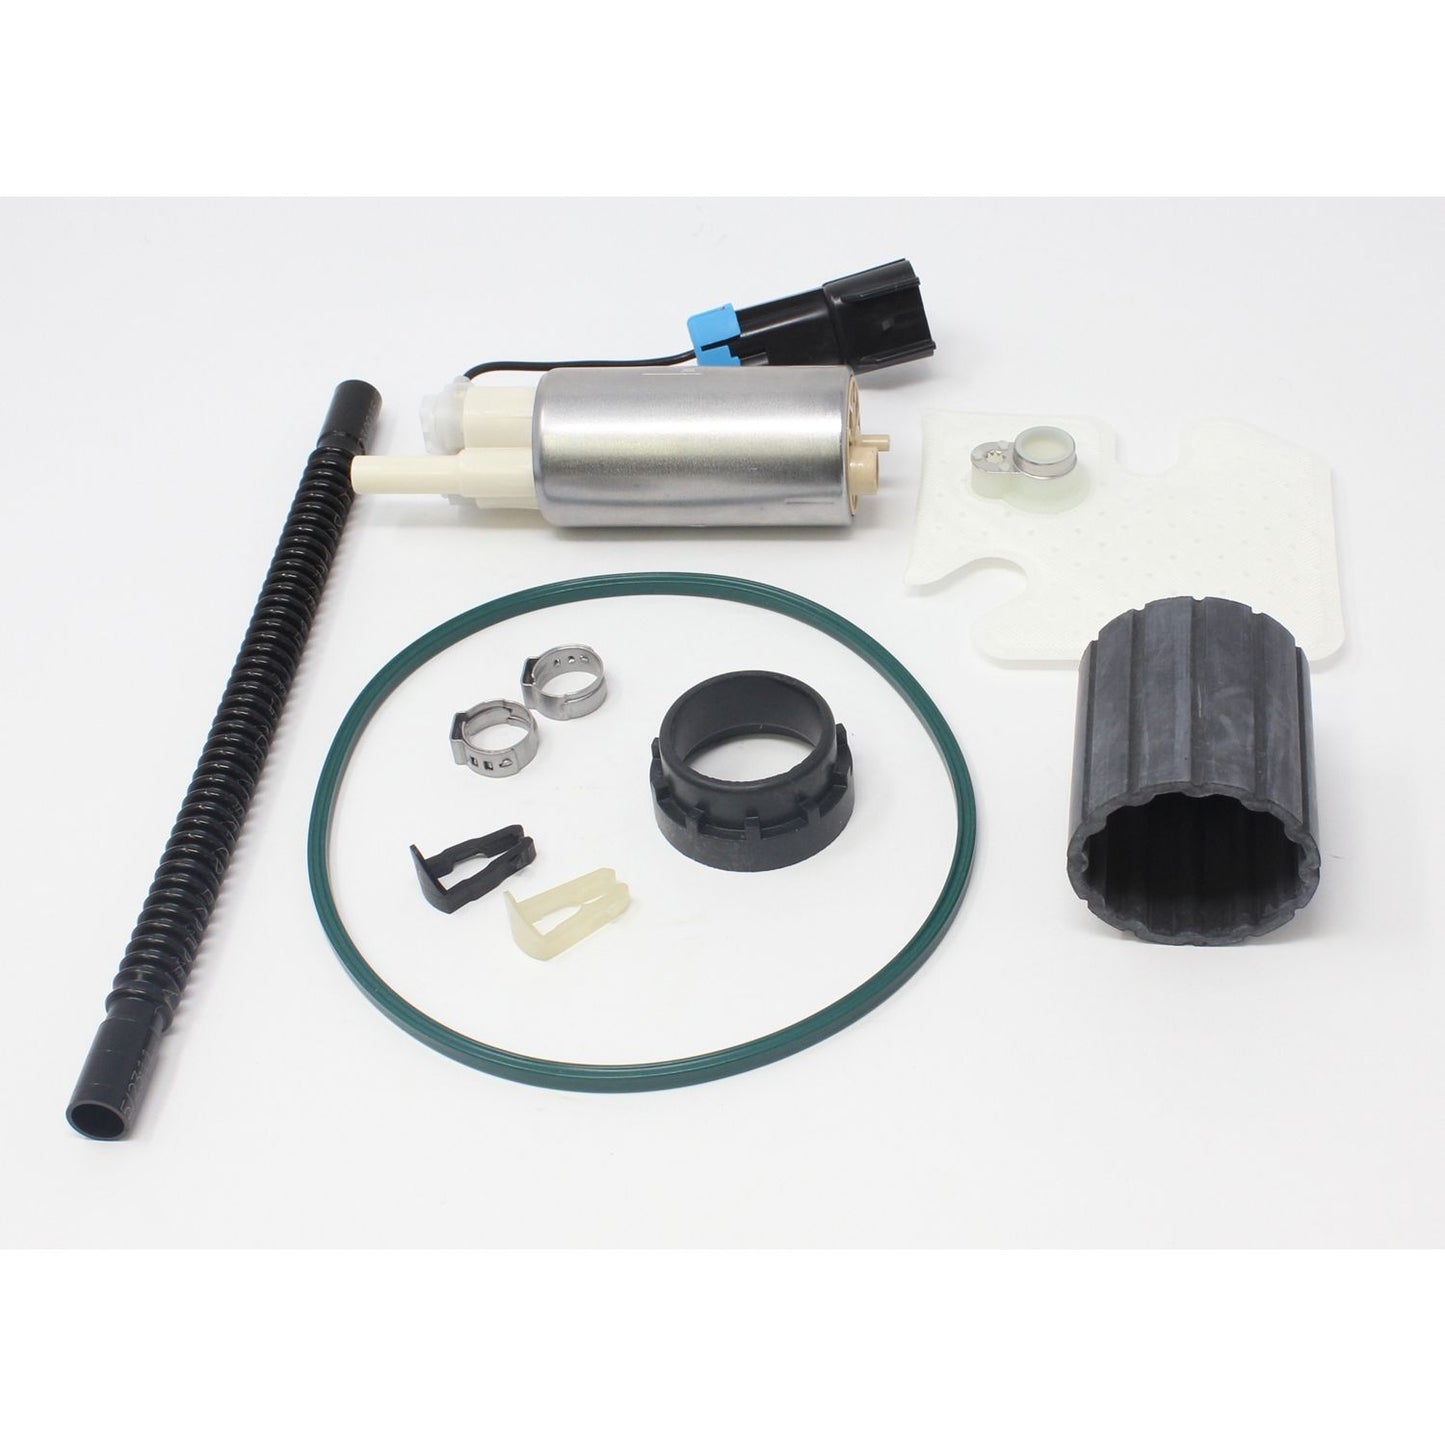 TI Automotive Stock Replacement Pump and Installation Kit for Gasoline Applications TCA932